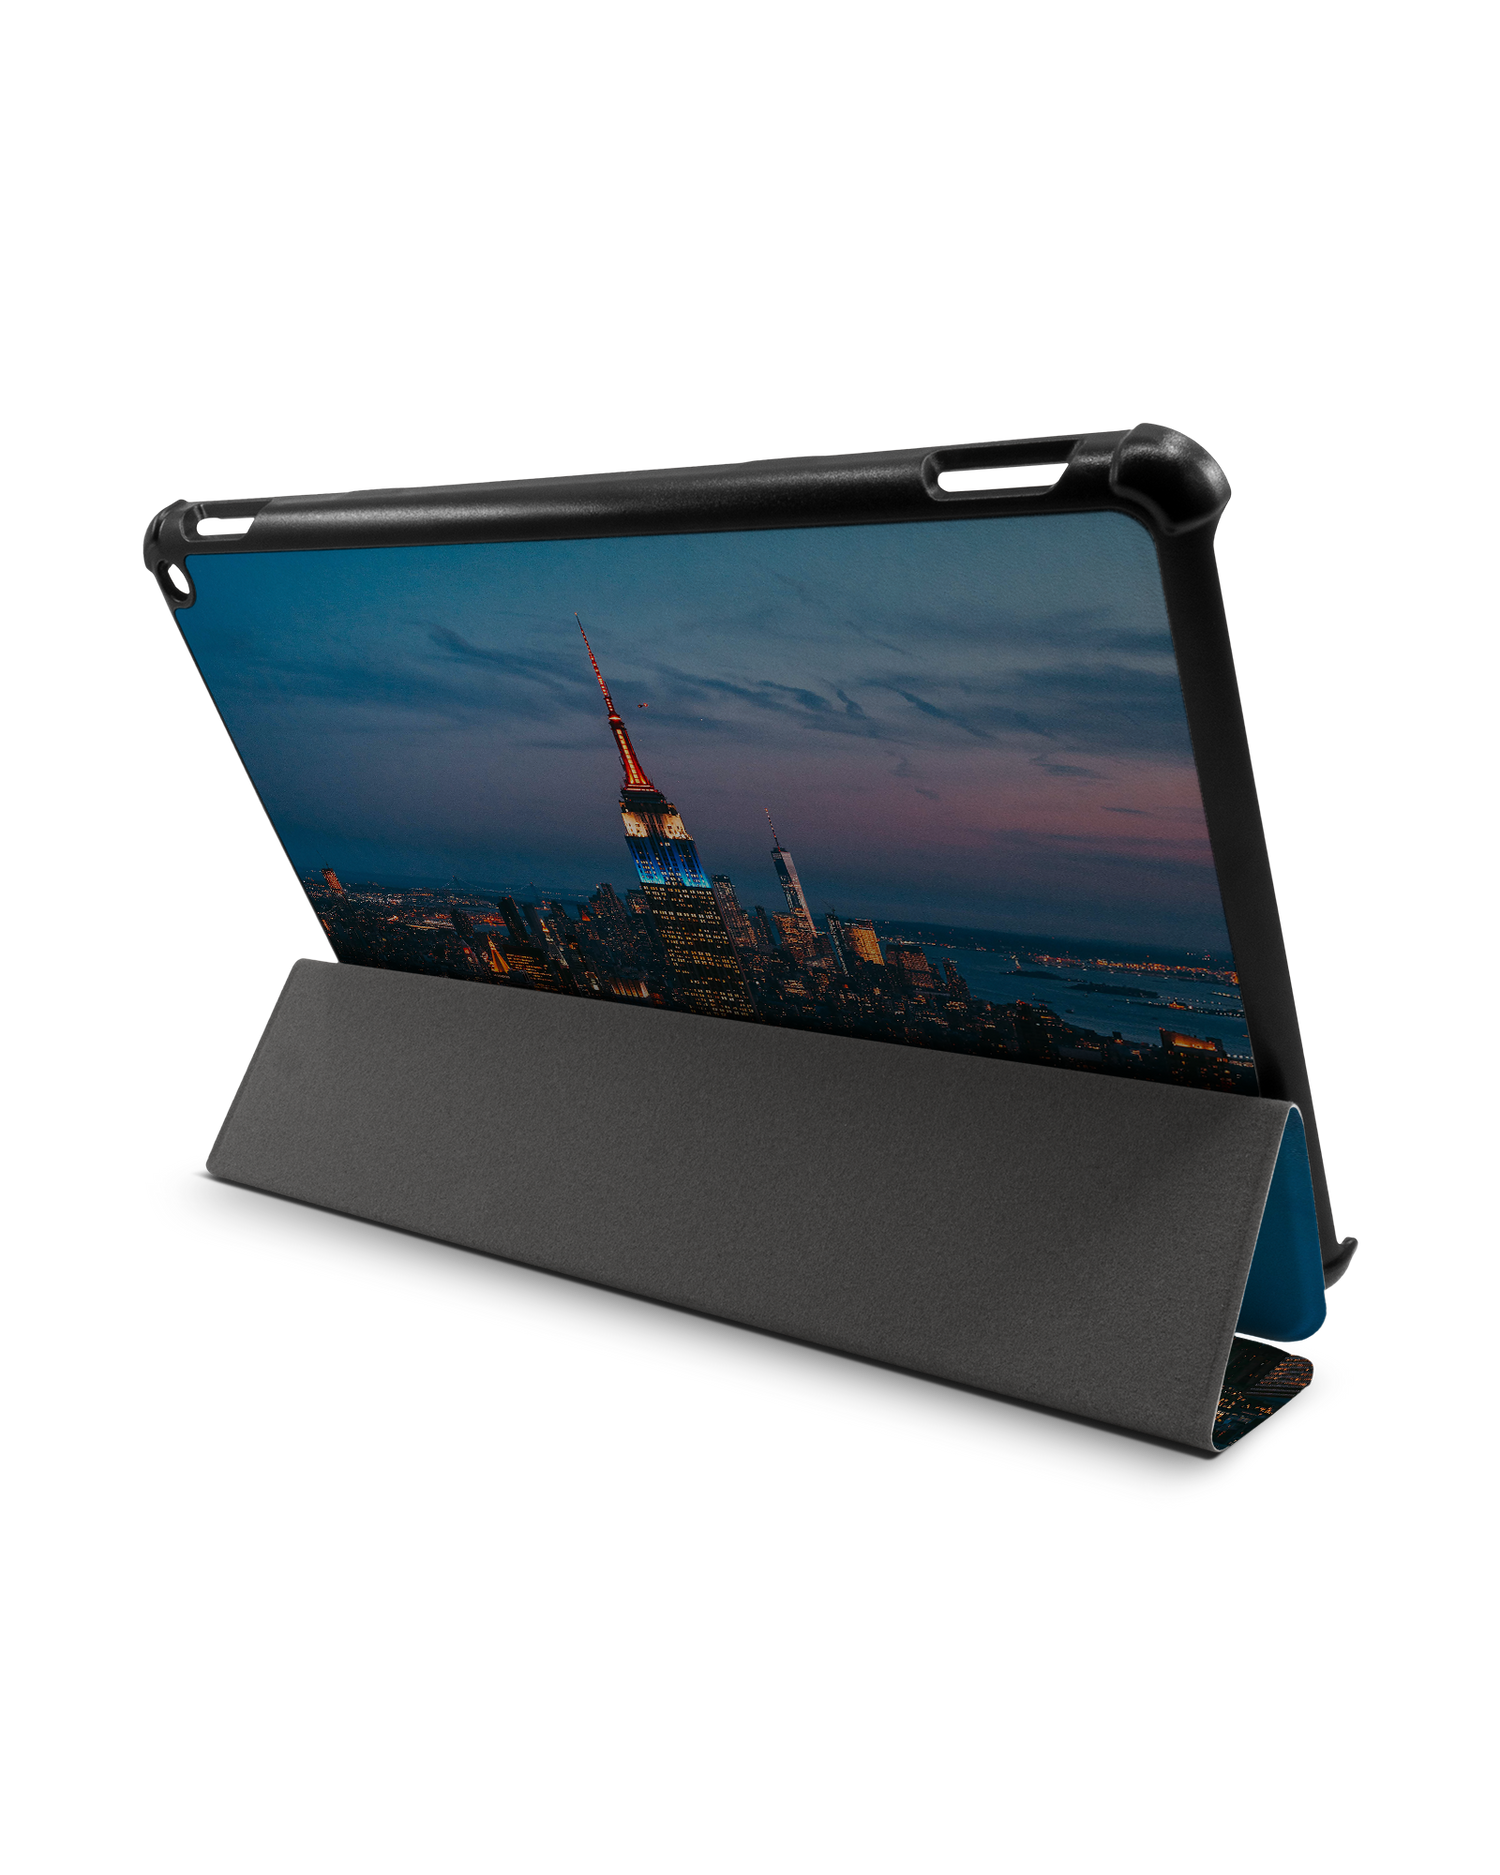 New York At Dusk Tablet Smart Case for Amazon Fire HD 10 (2021): Used as Stand